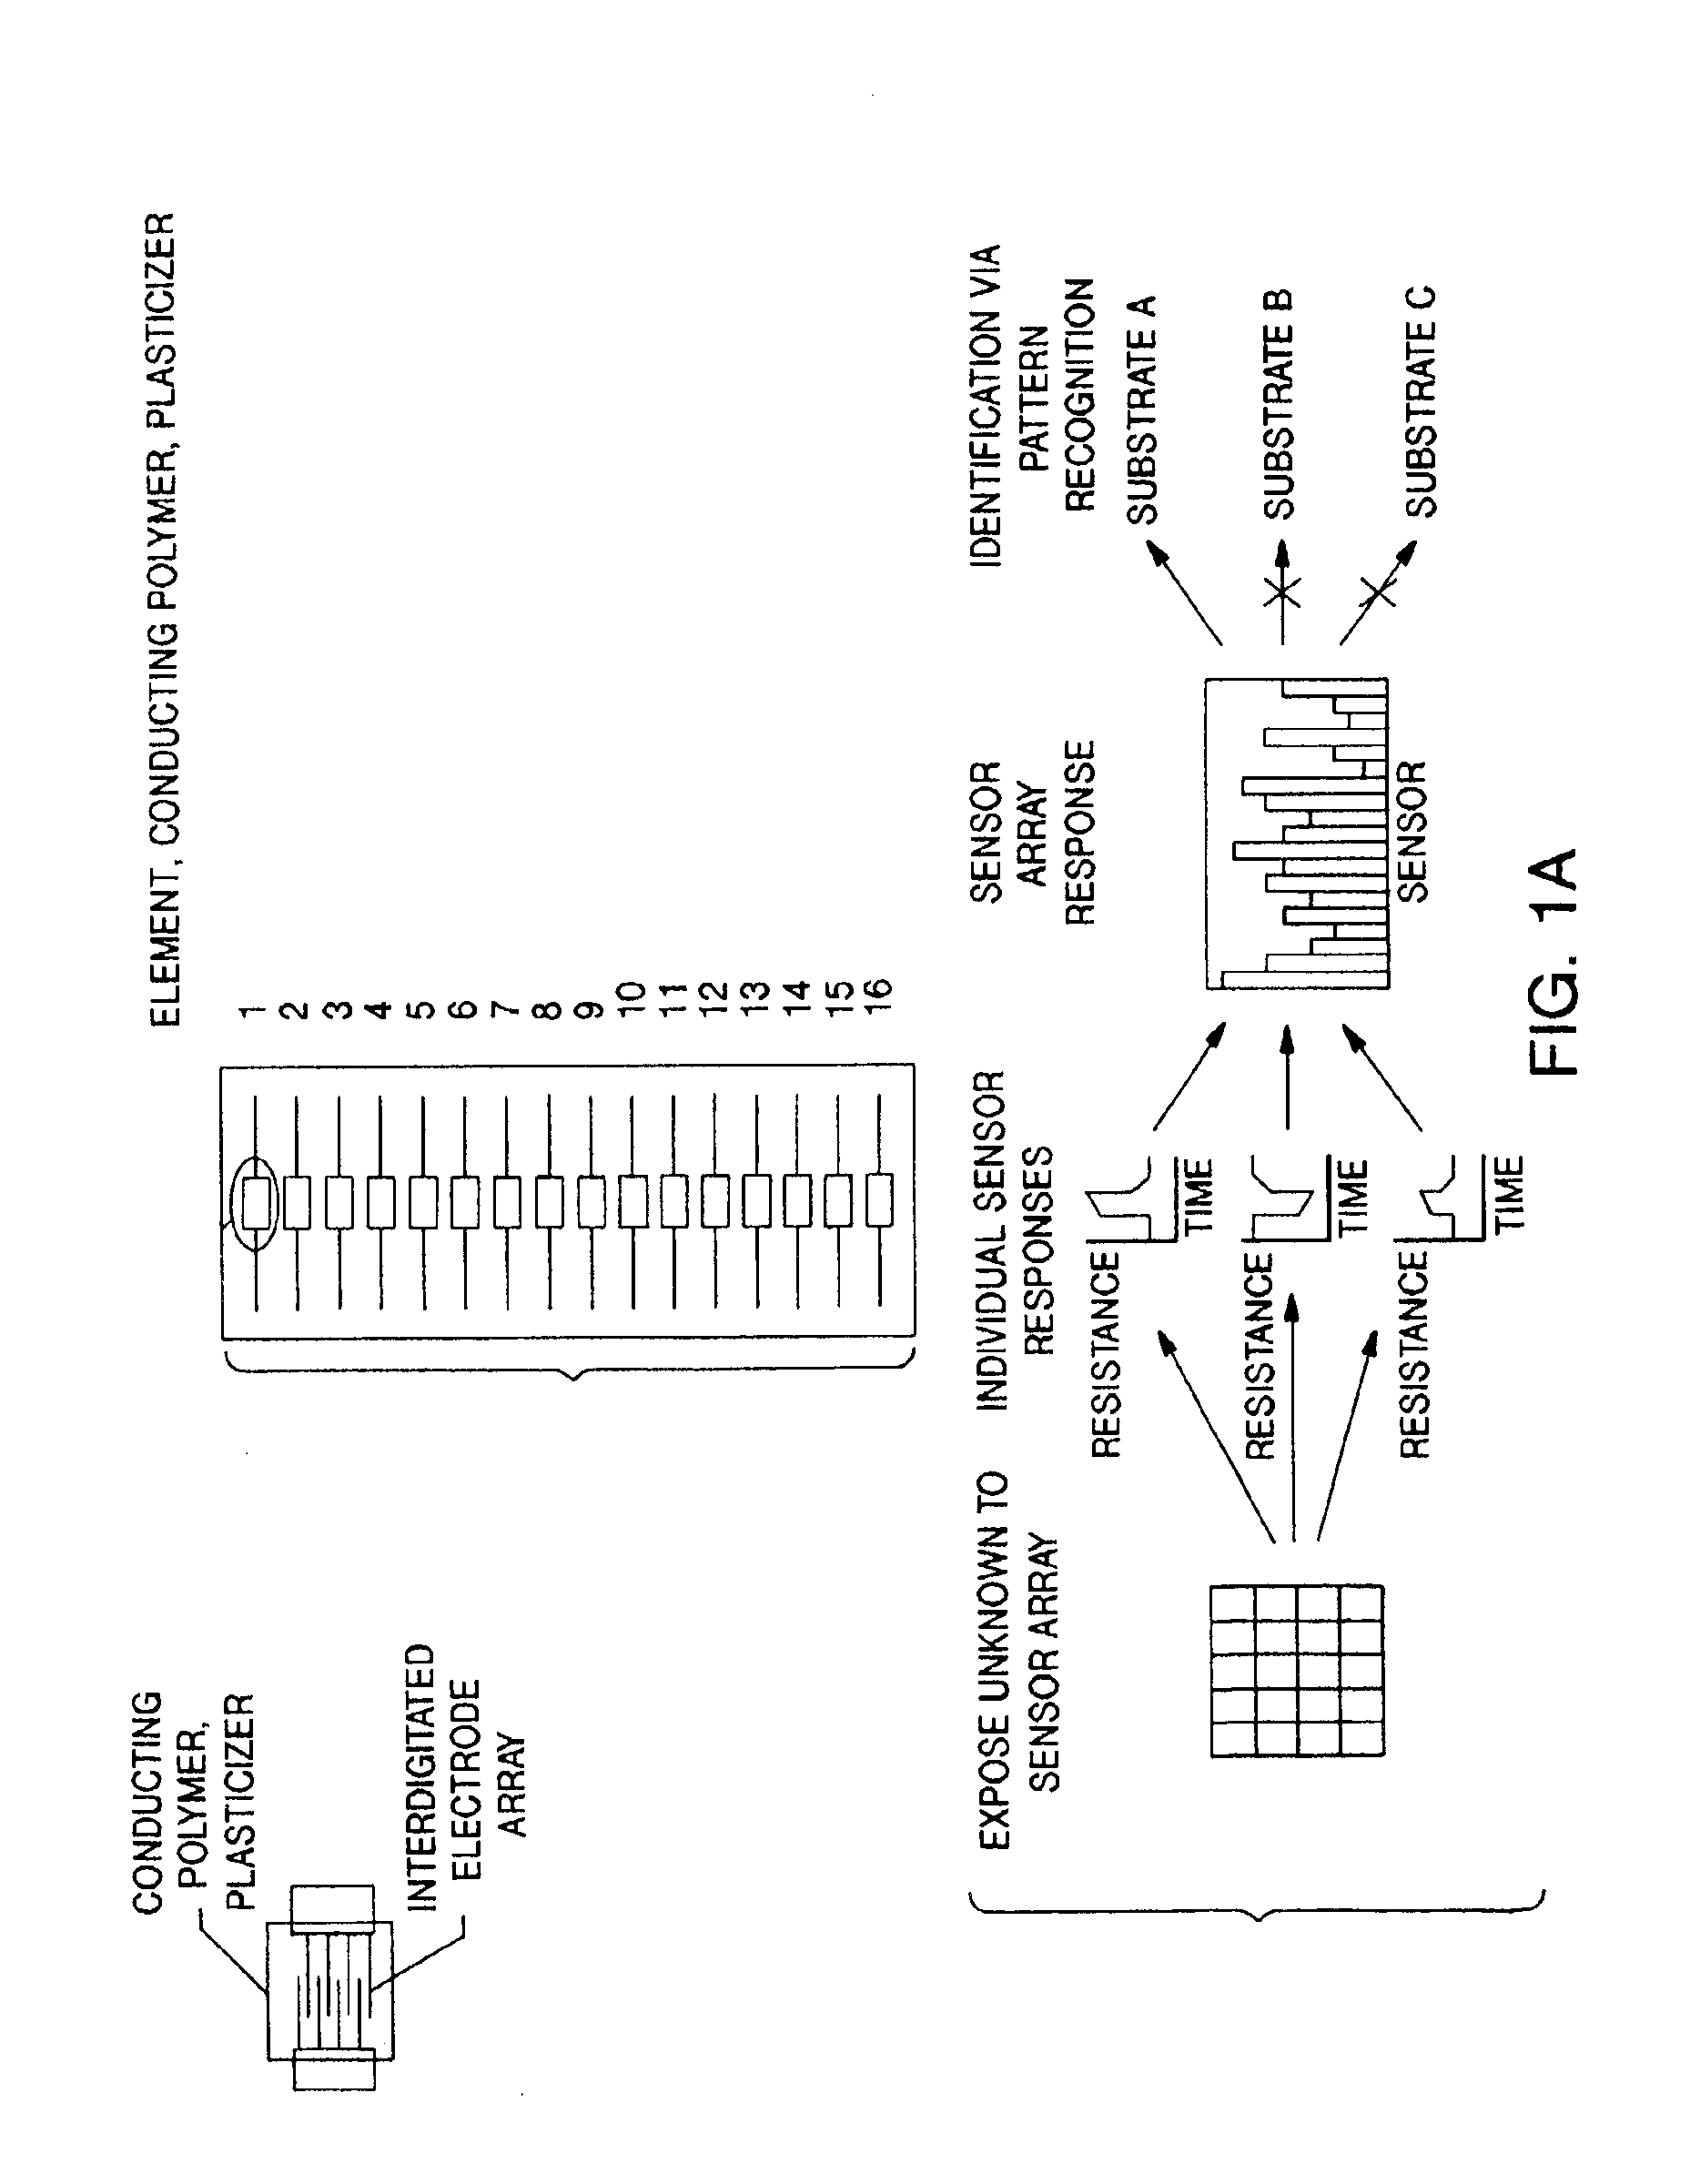 Sensors of conducting and insulating composites